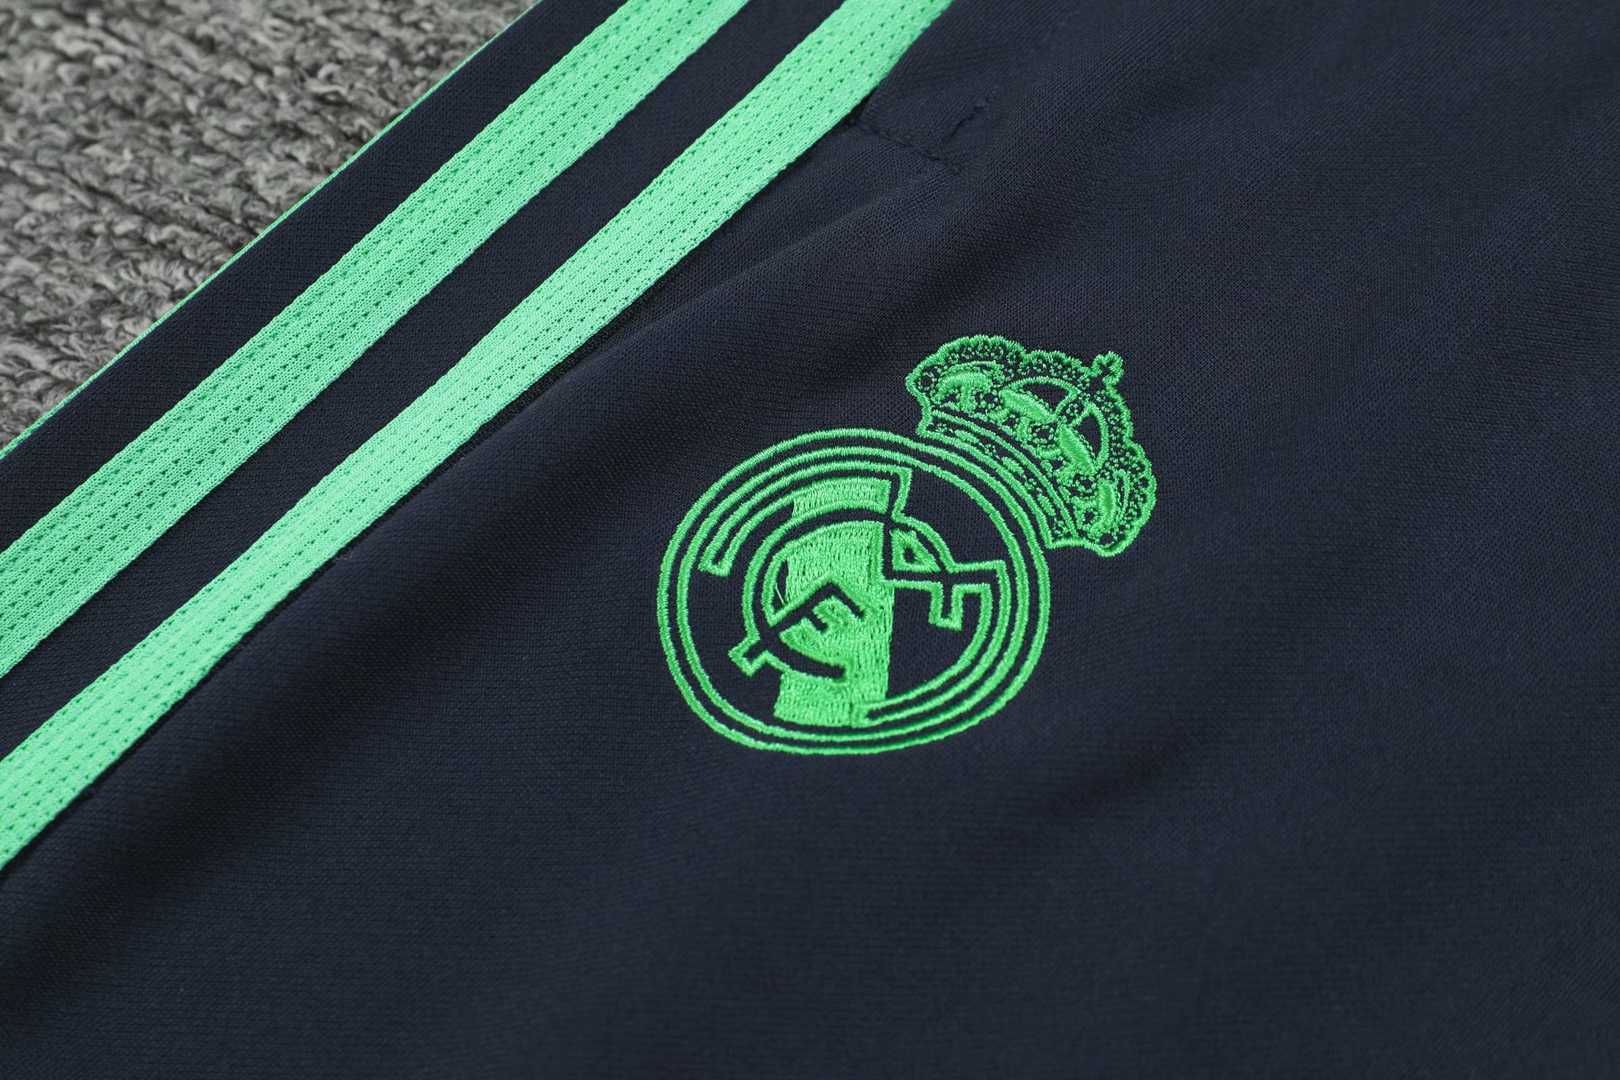 2019/20 Real Madrid High Neck Blue Mens Soccer Training Suit(SweatJersey + Pants)